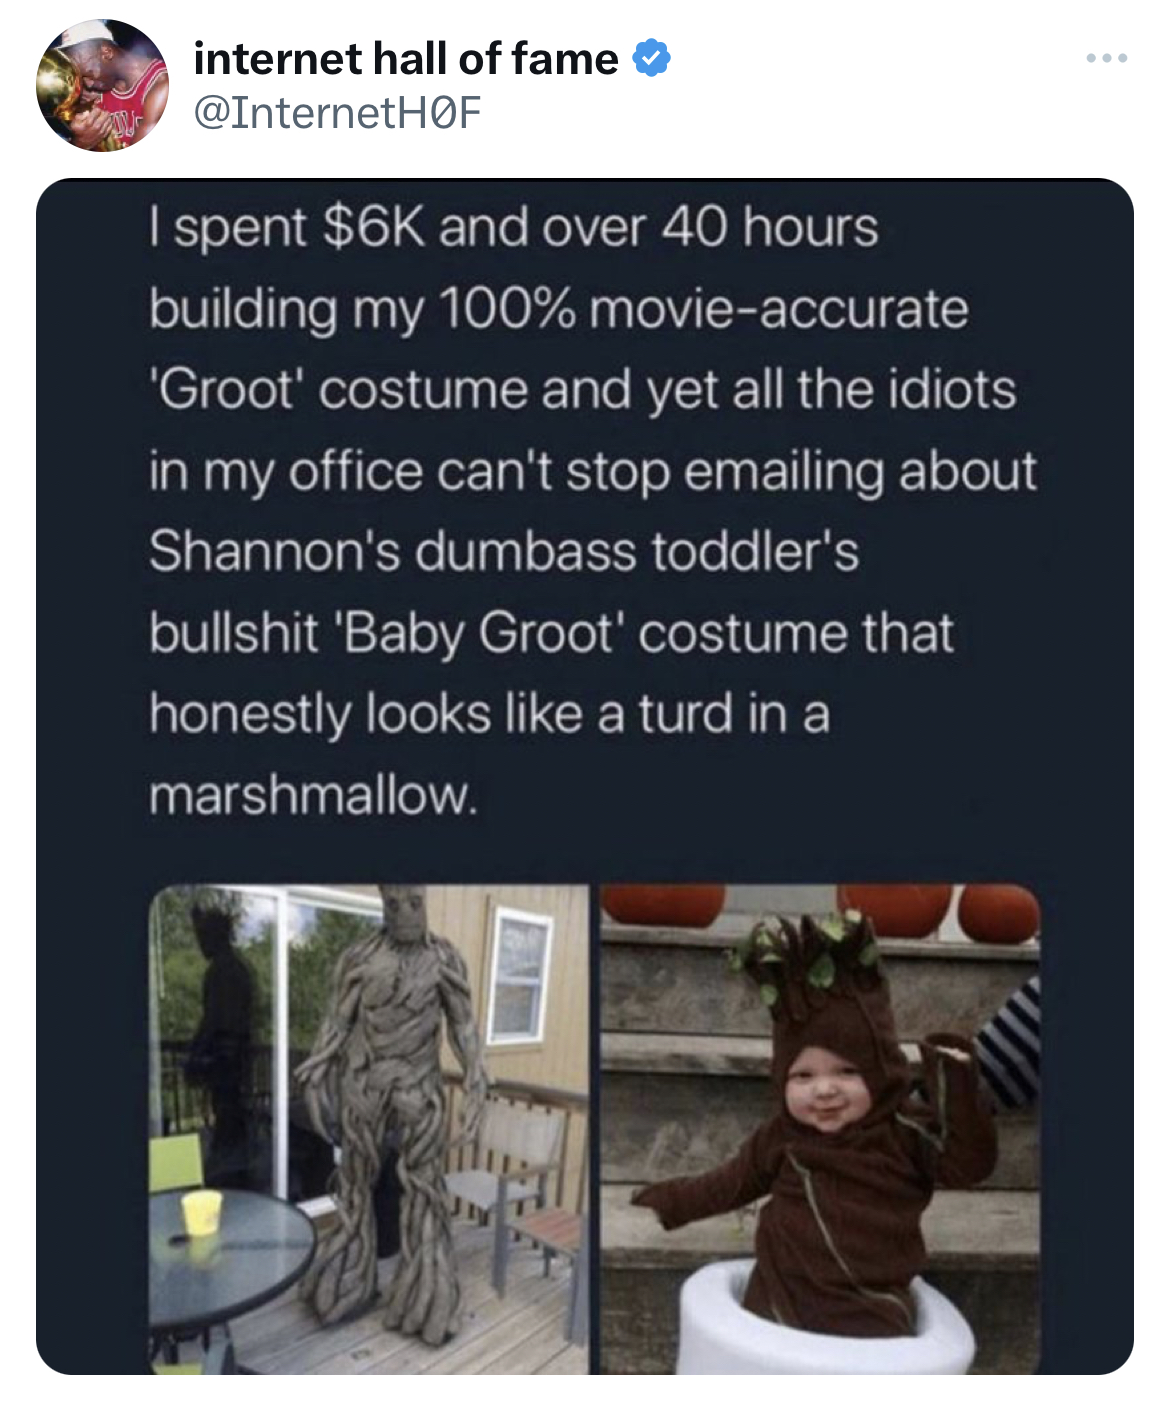 savage tweets - media - internet hall of fame I spent $6K and over 40 hours building my 100% movieaccurate 'Groot' costume and yet all the idiots in my office can't stop emailing about Shannon's dumbass toddler's bullshit 'Baby Groot' costume that honestl